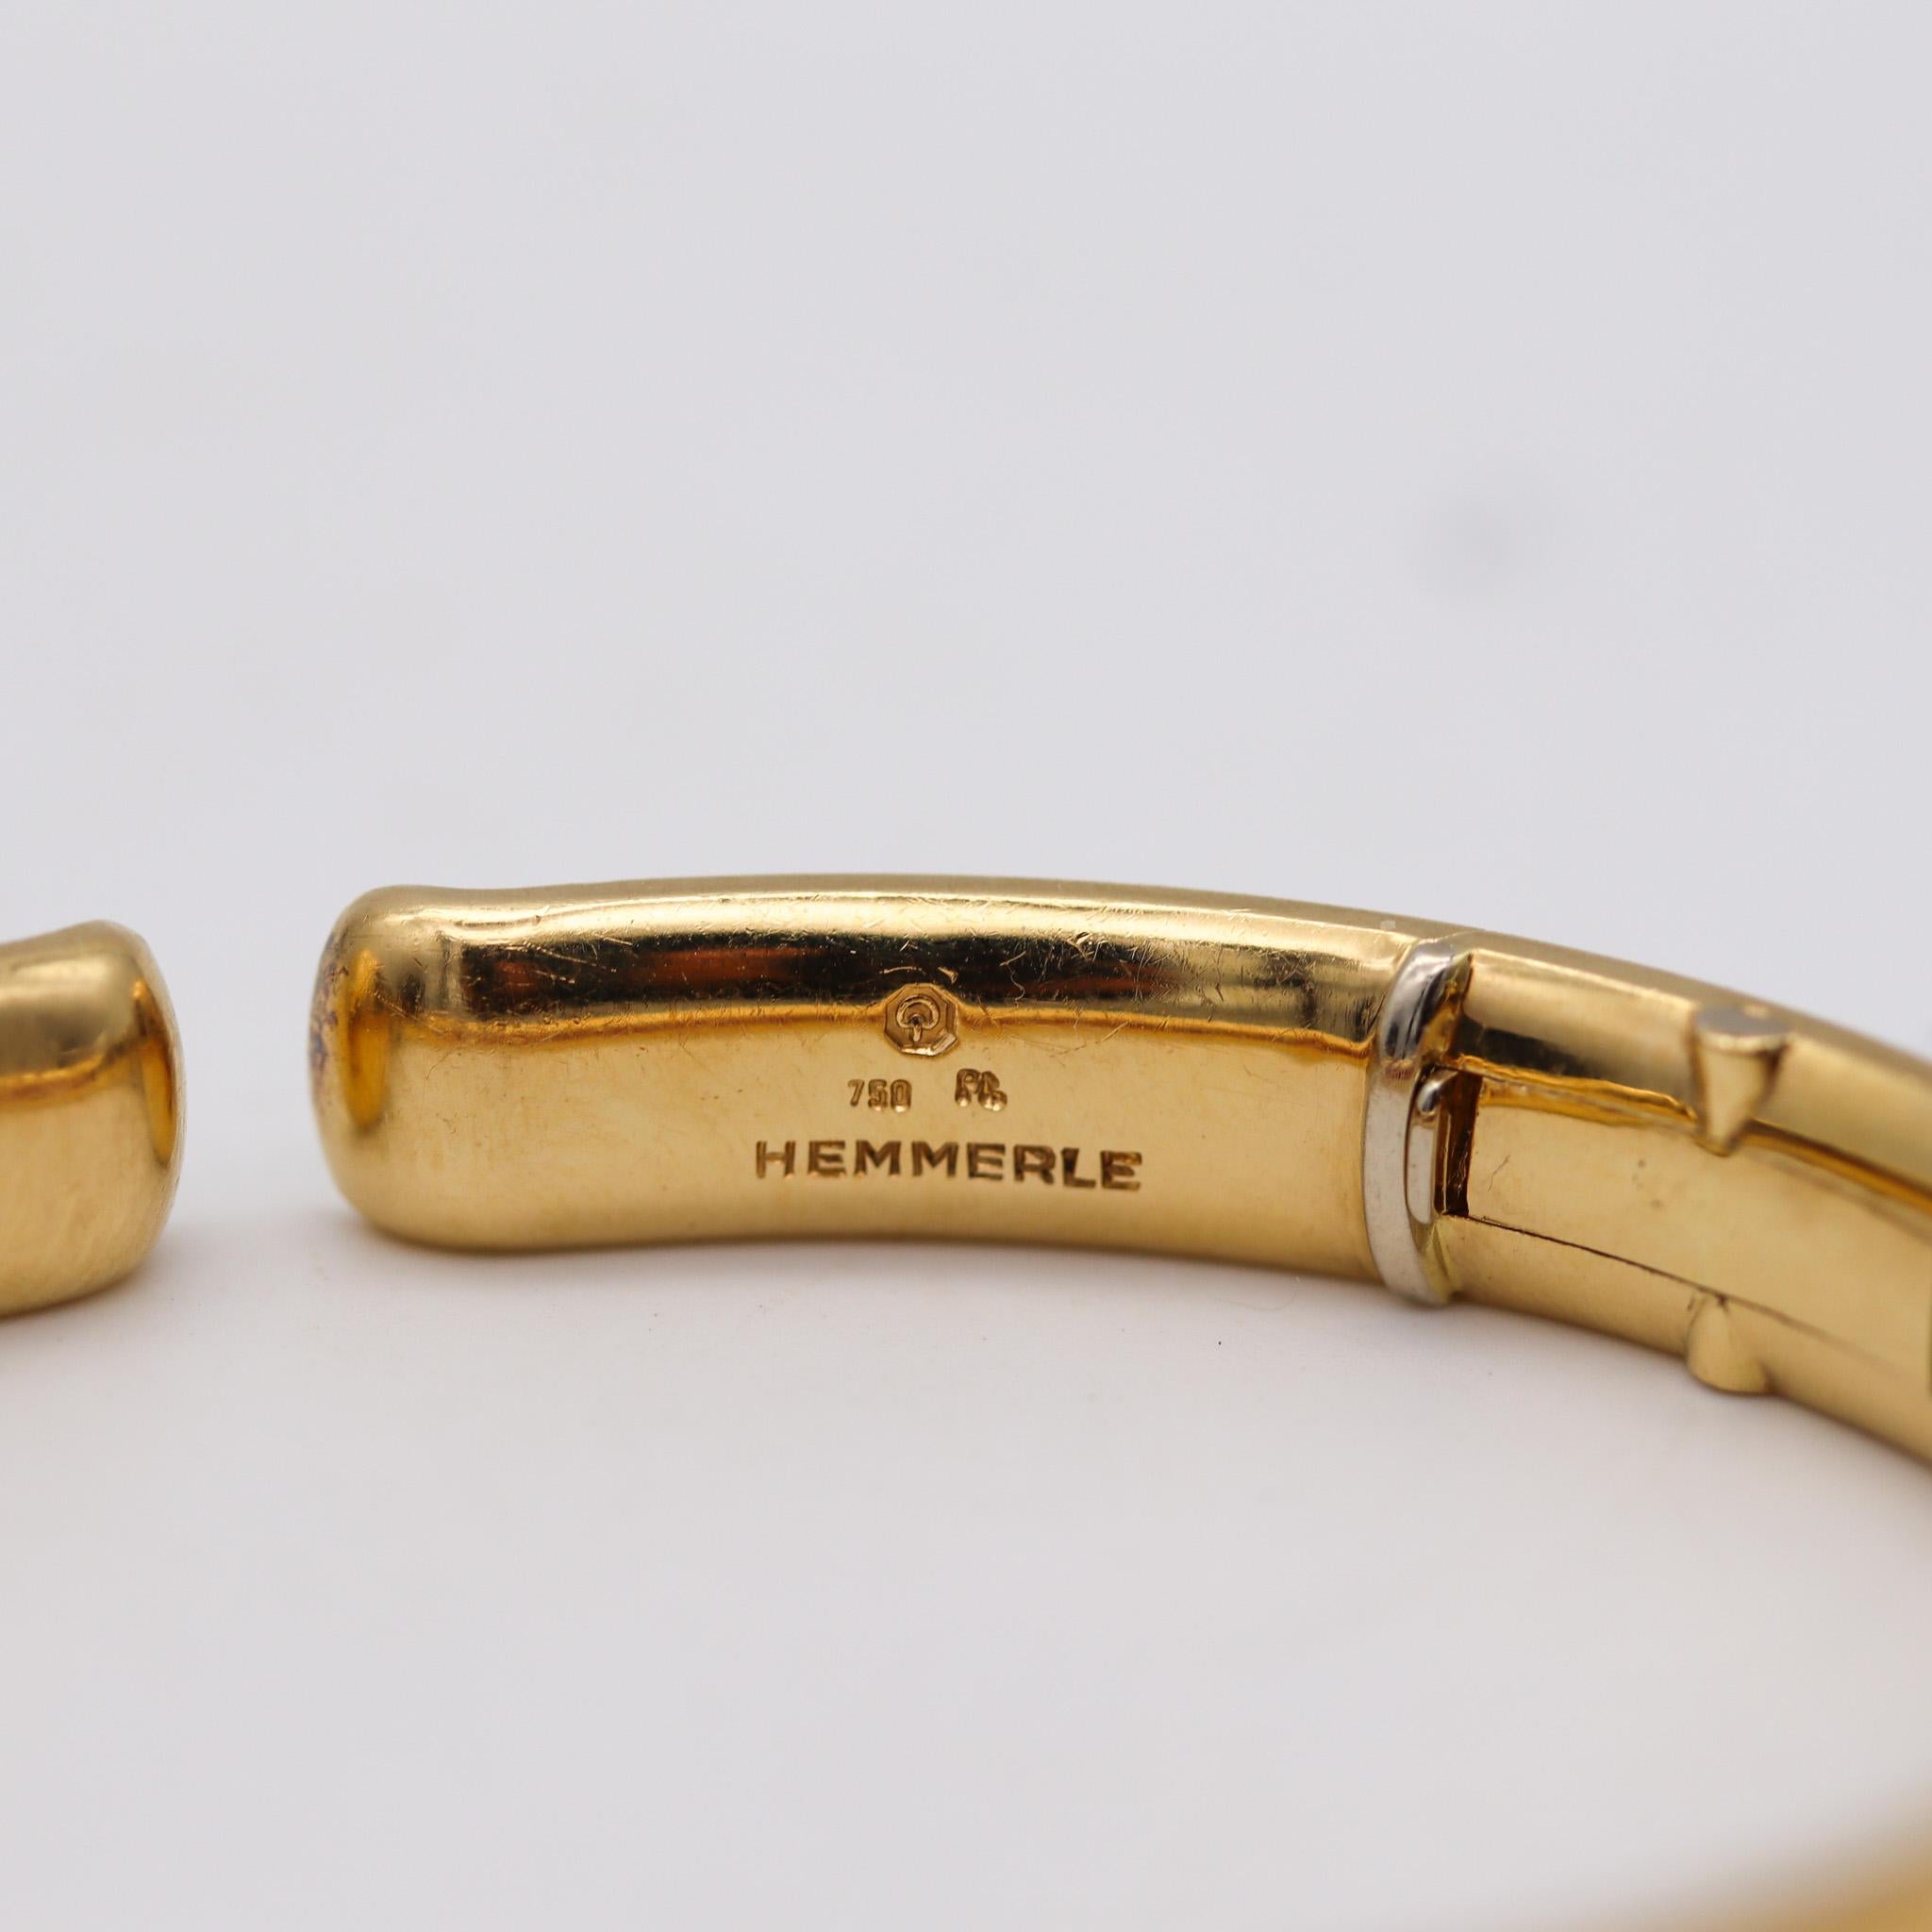 A bracelet with rubies designed by Hemmerle.

An outstanding bracelet, created in Munich by the German jewelry house of Hemmerle. This beautiful and very chic piece of jewelry has been crafted in solid yellow gold of 18 karats with details in solid